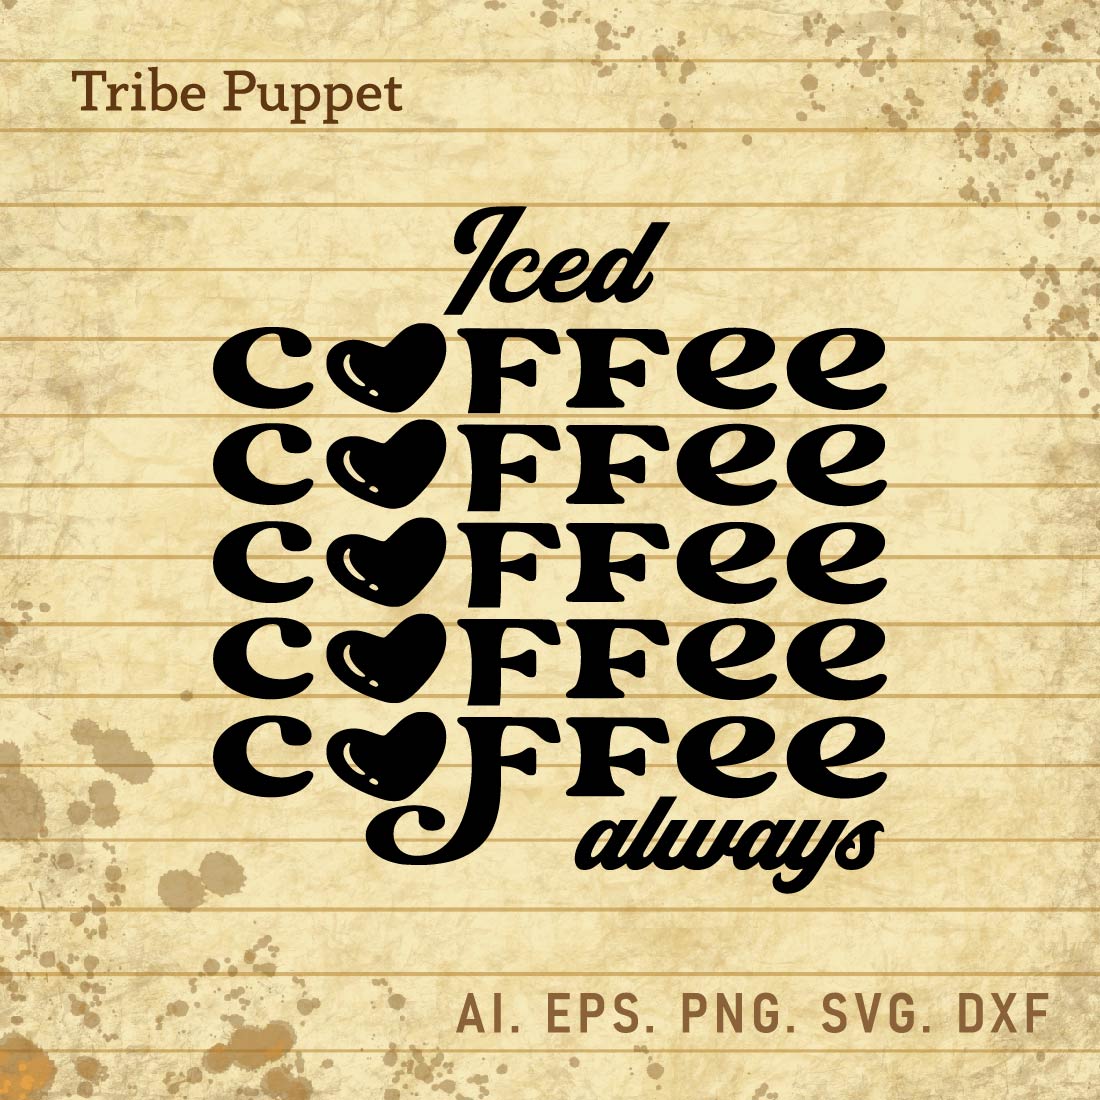 Coffee Quotes cover image.